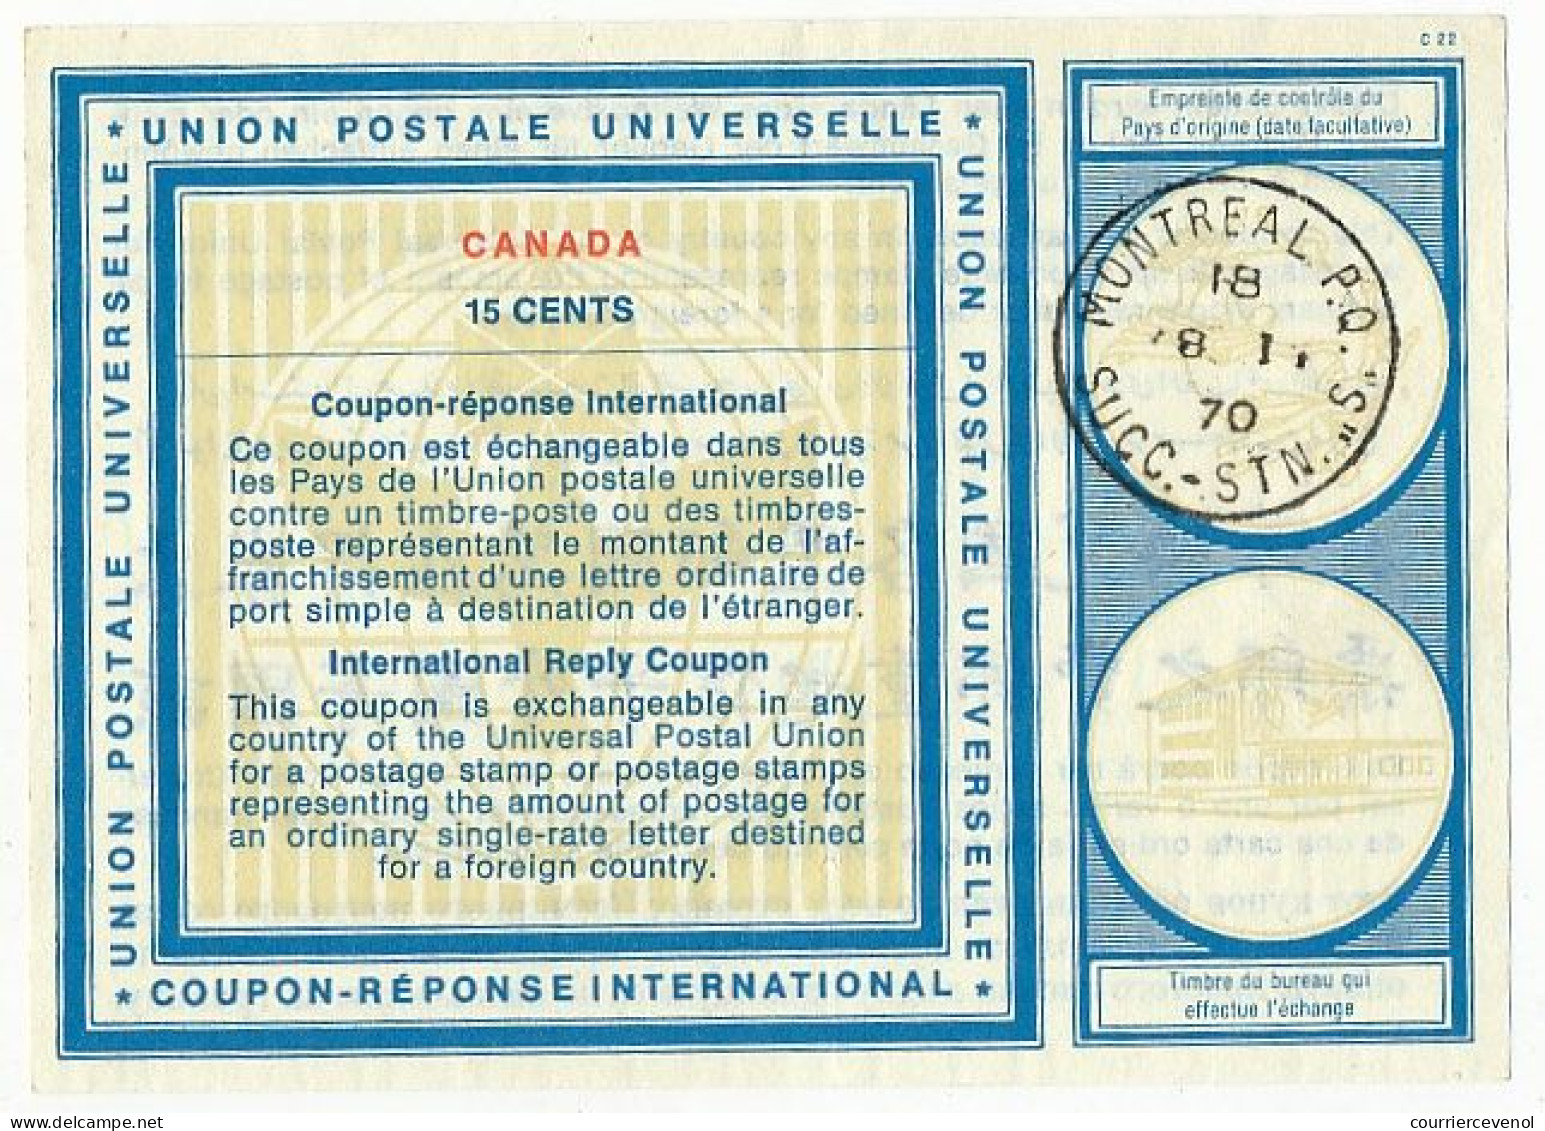 CANADA - COUPON REPONSE INTERNATIONAL. INTERNATIONAL REPLY COUPON. 15 CENTS. MONTREAL P.Q. - Cupones Respuesta